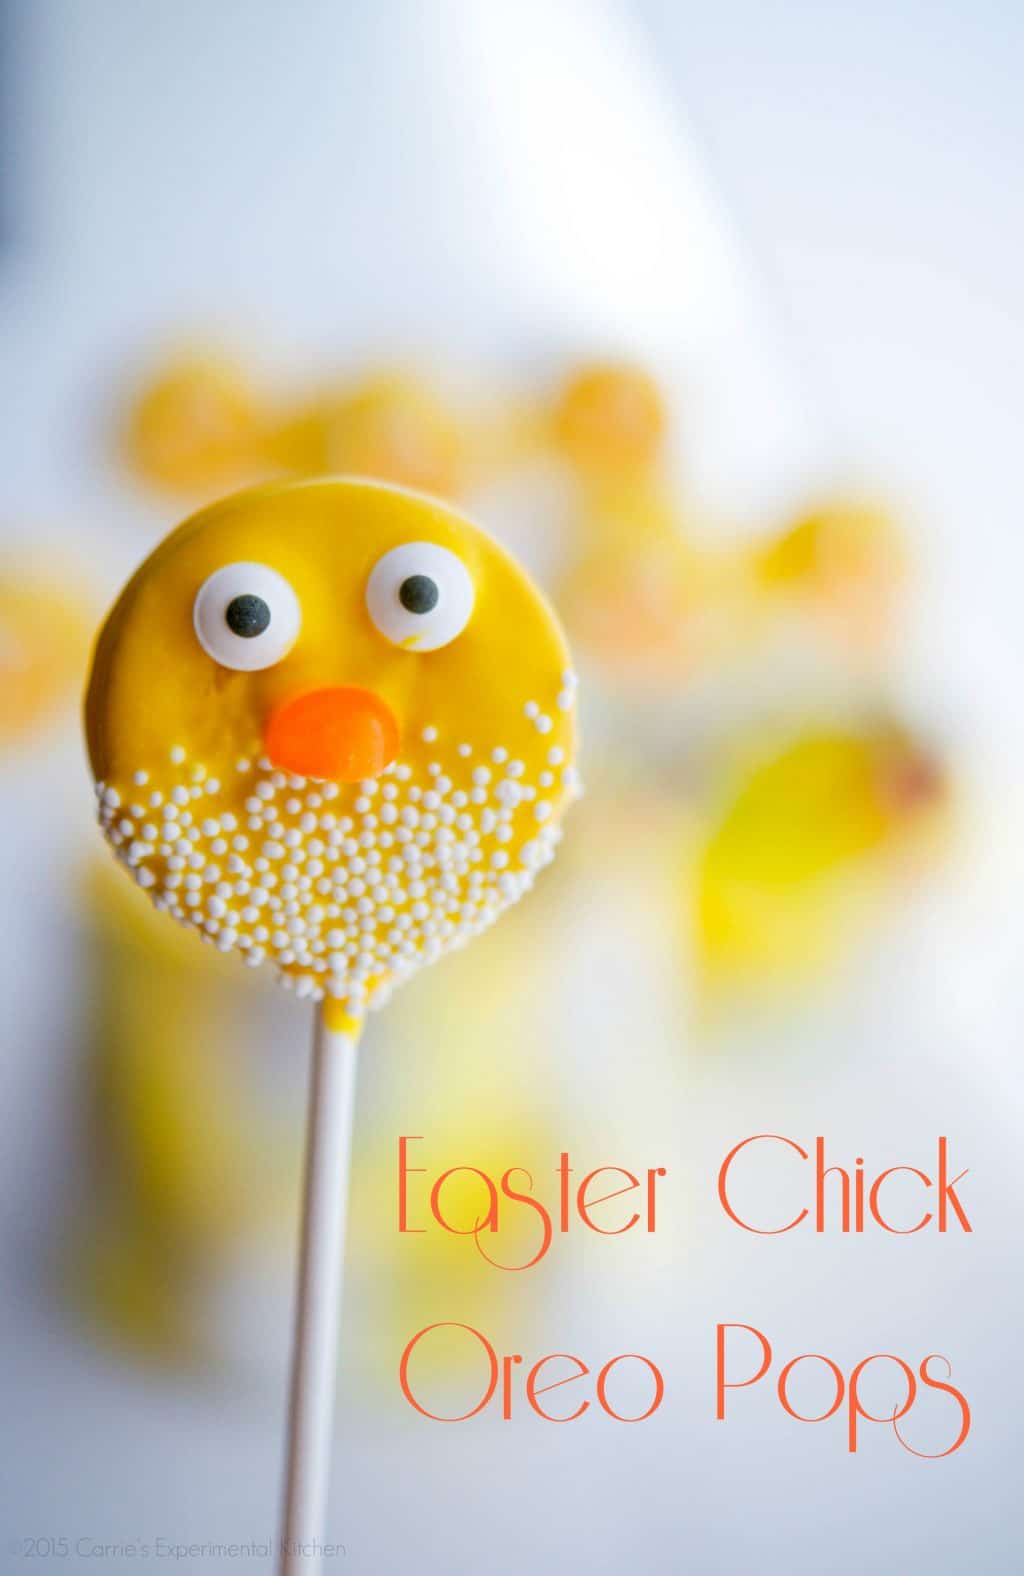 Easter Chick Oreo Pops from Carrie's Experimental Kitchen